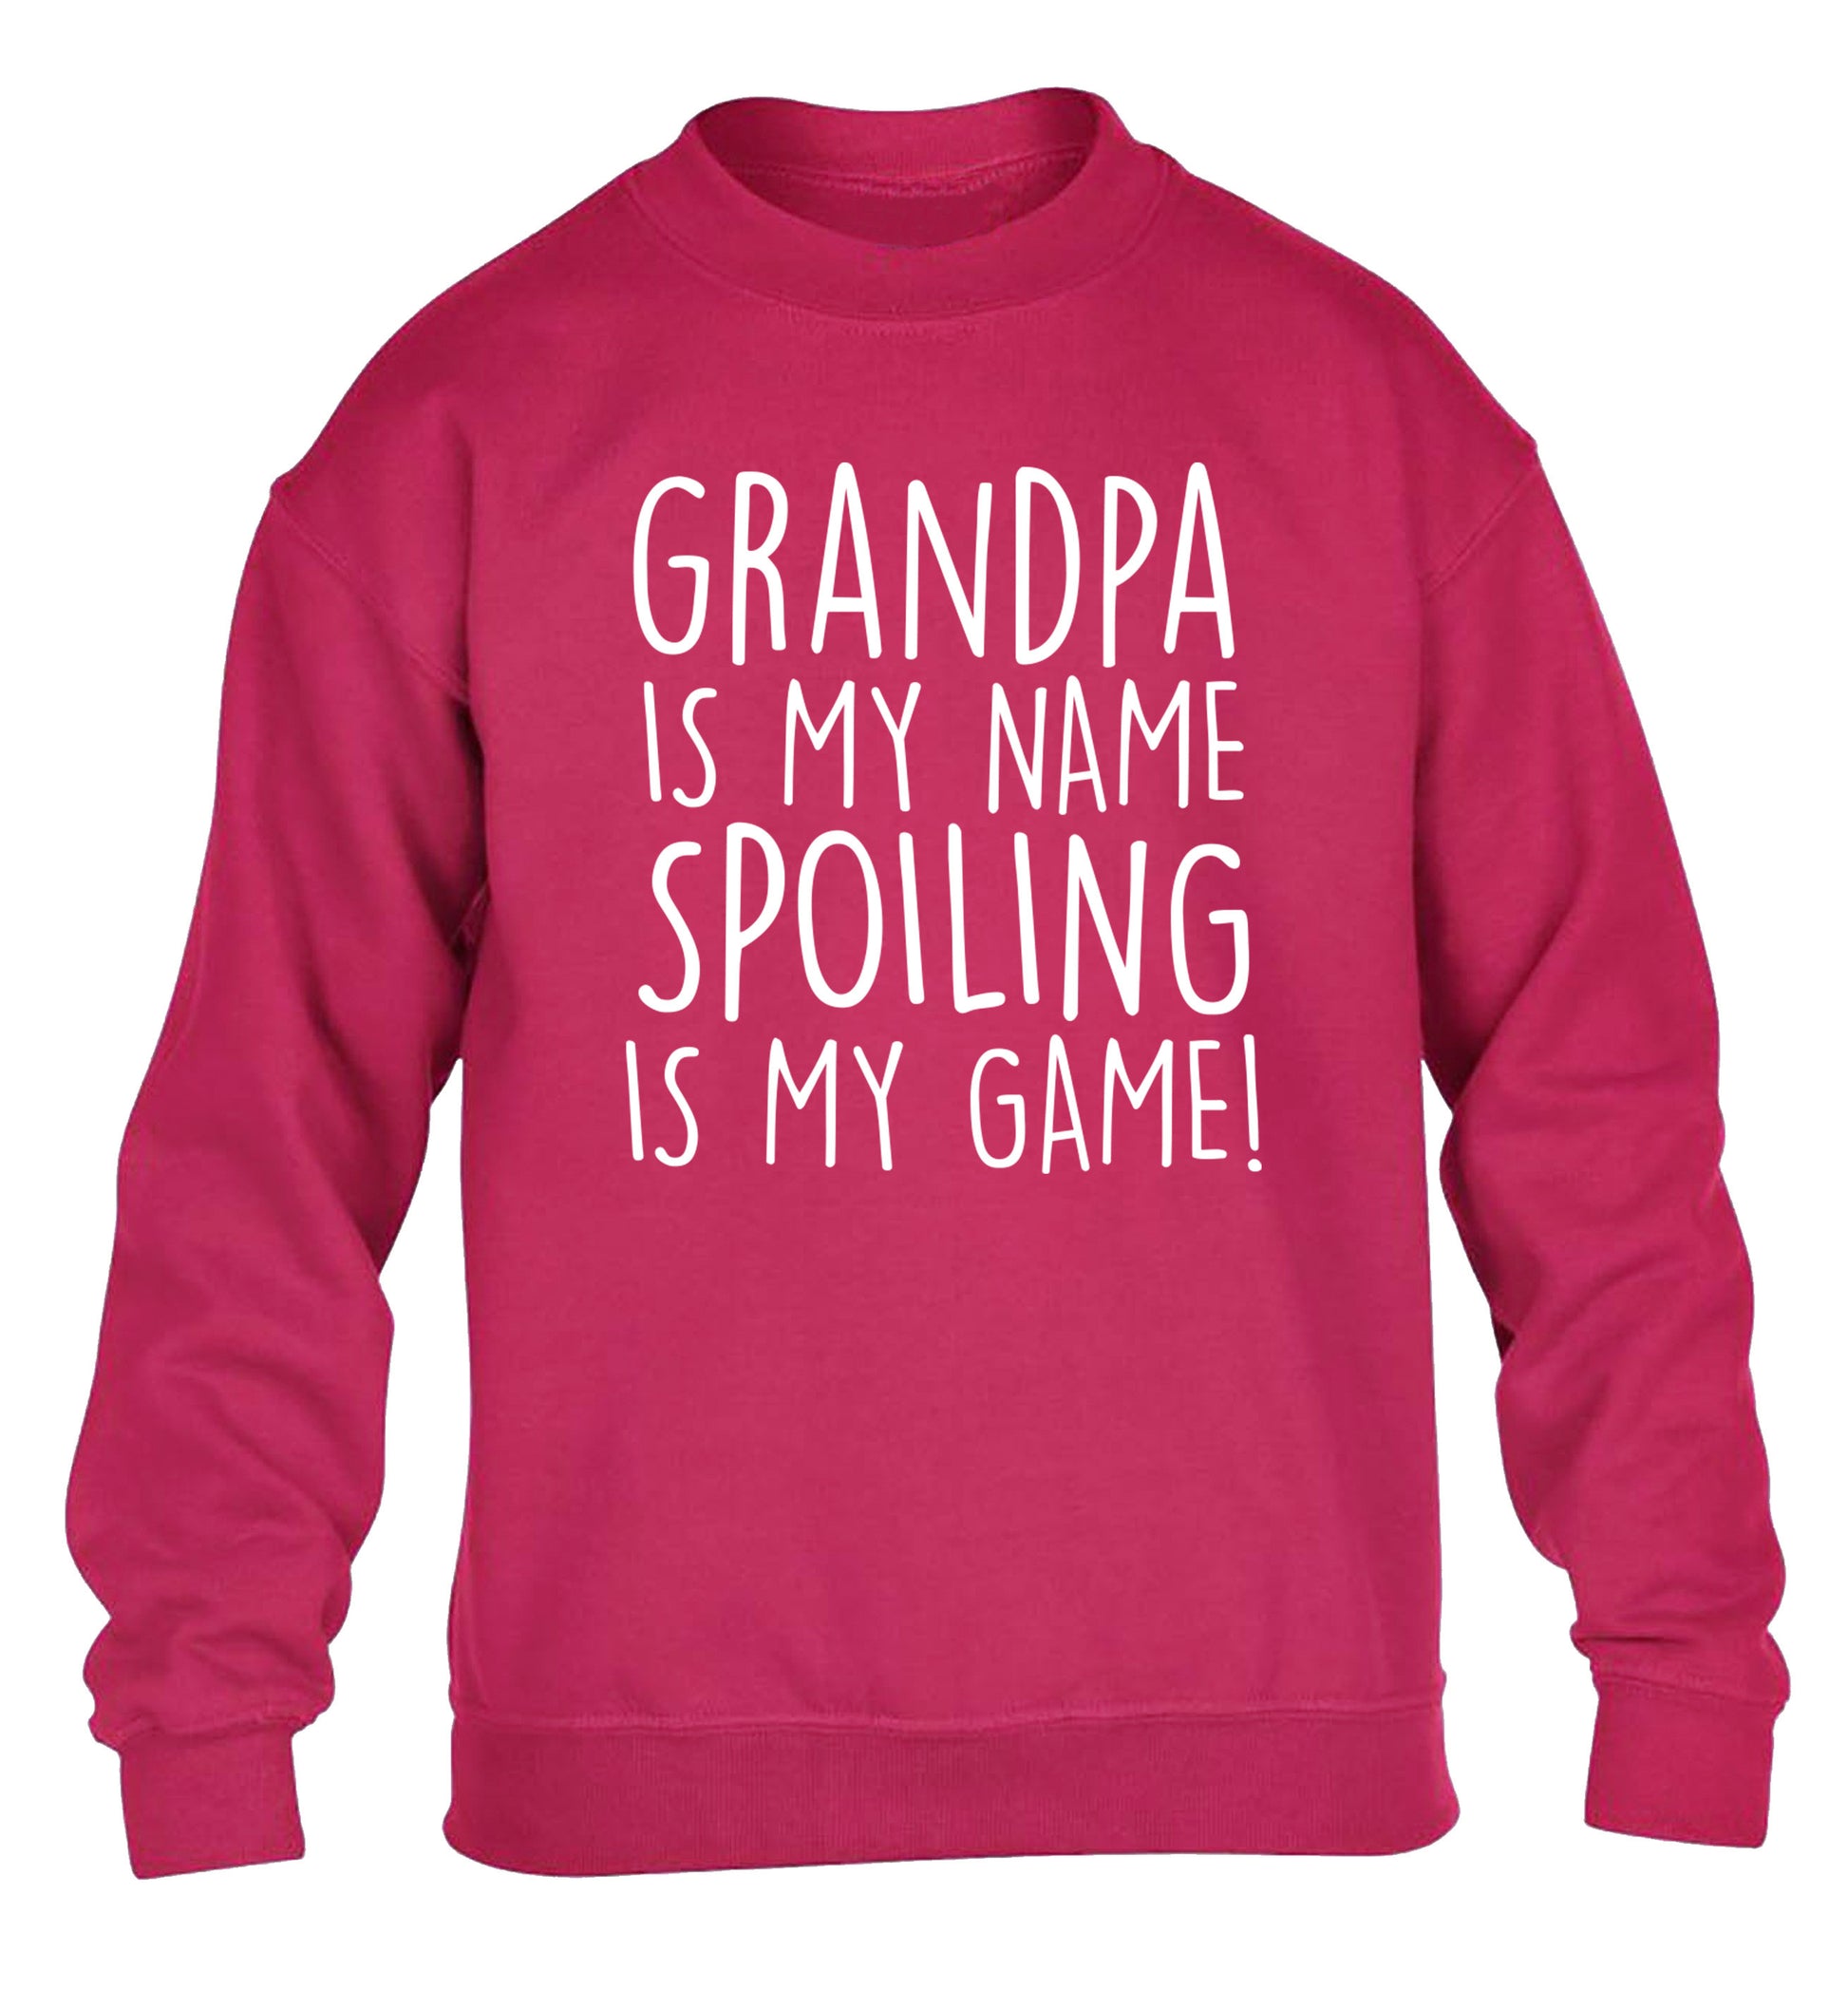 Grandpa is my name, spoiling is my game children's pink sweater 12-14 Years